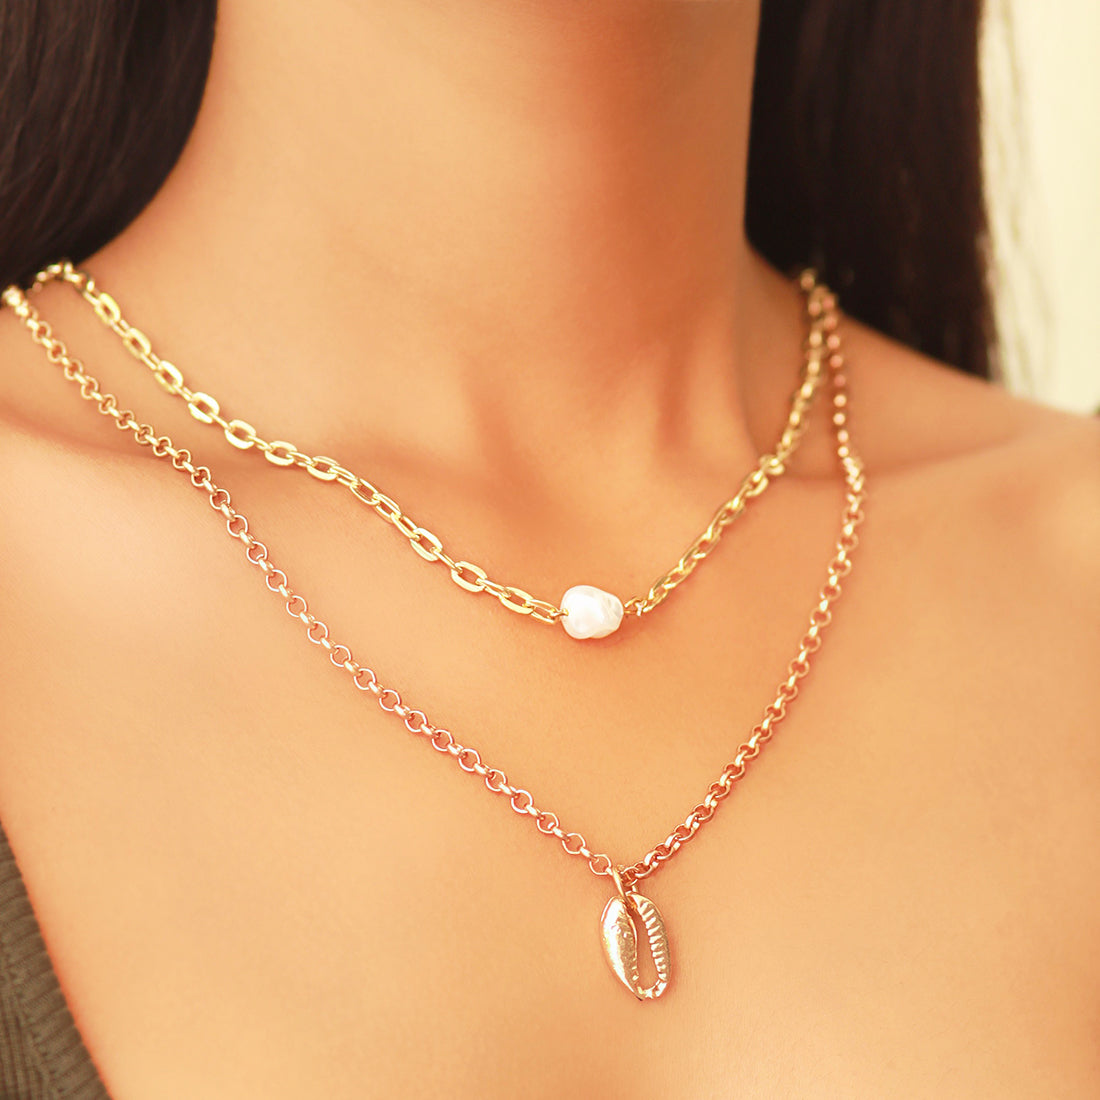 Pearl & Shell Pendants Chain Link Gold-Toned Necklace